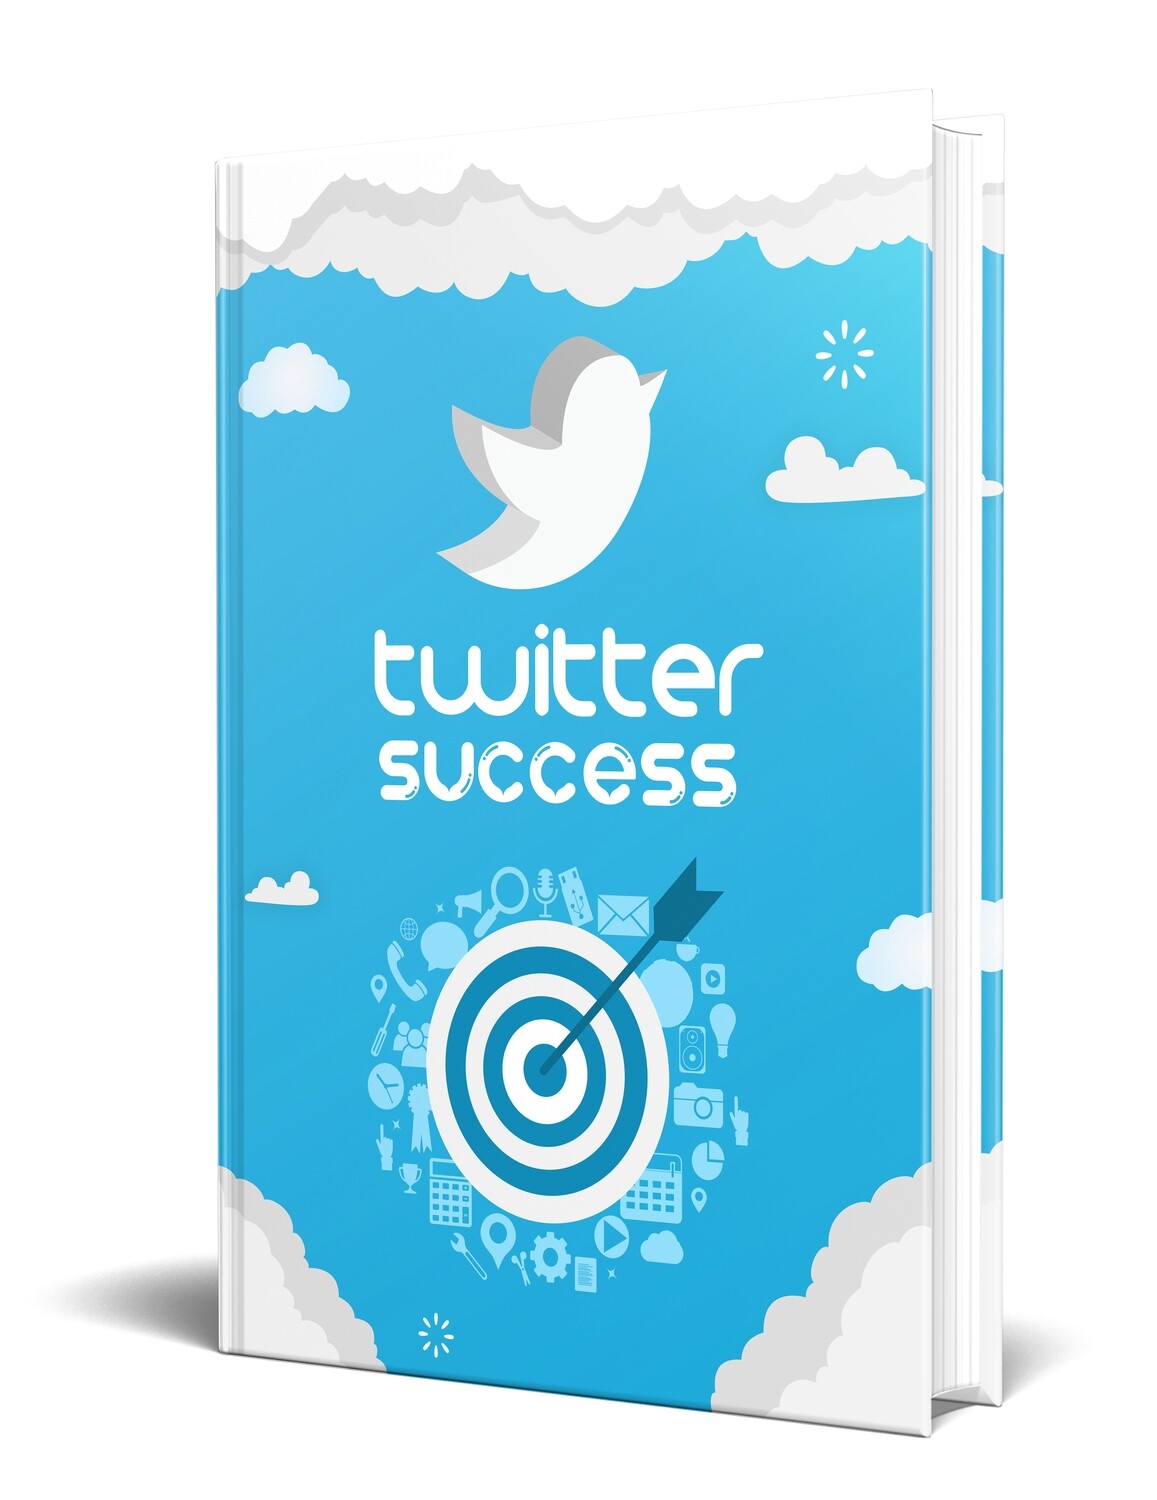 Twitter Success Best Practices to Follow